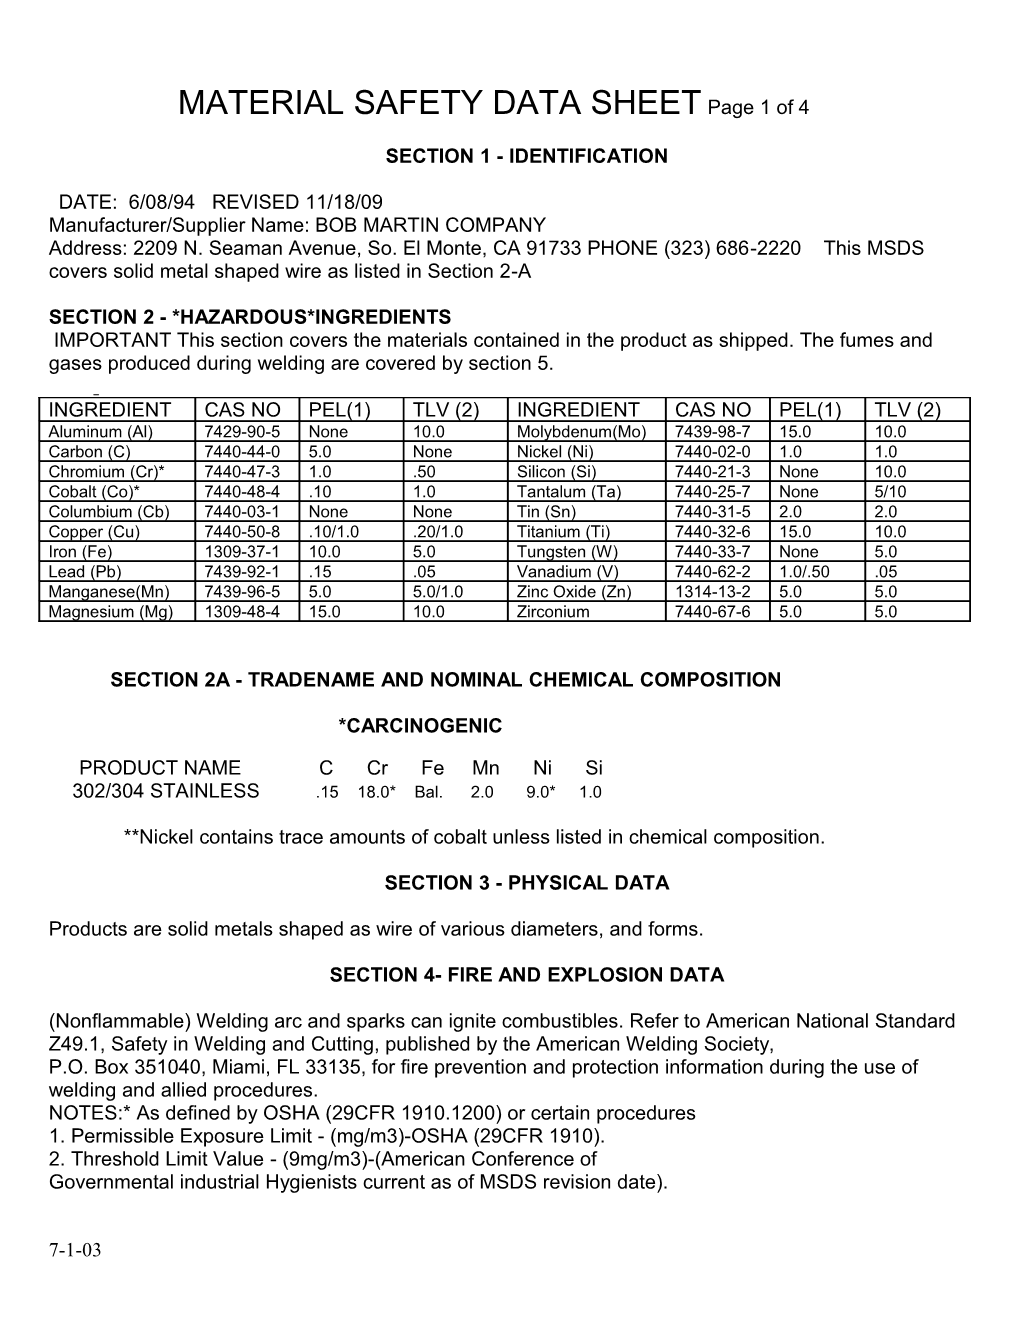 MATERIAL SAFETY DATA SHEET Page 1 of 4 s1